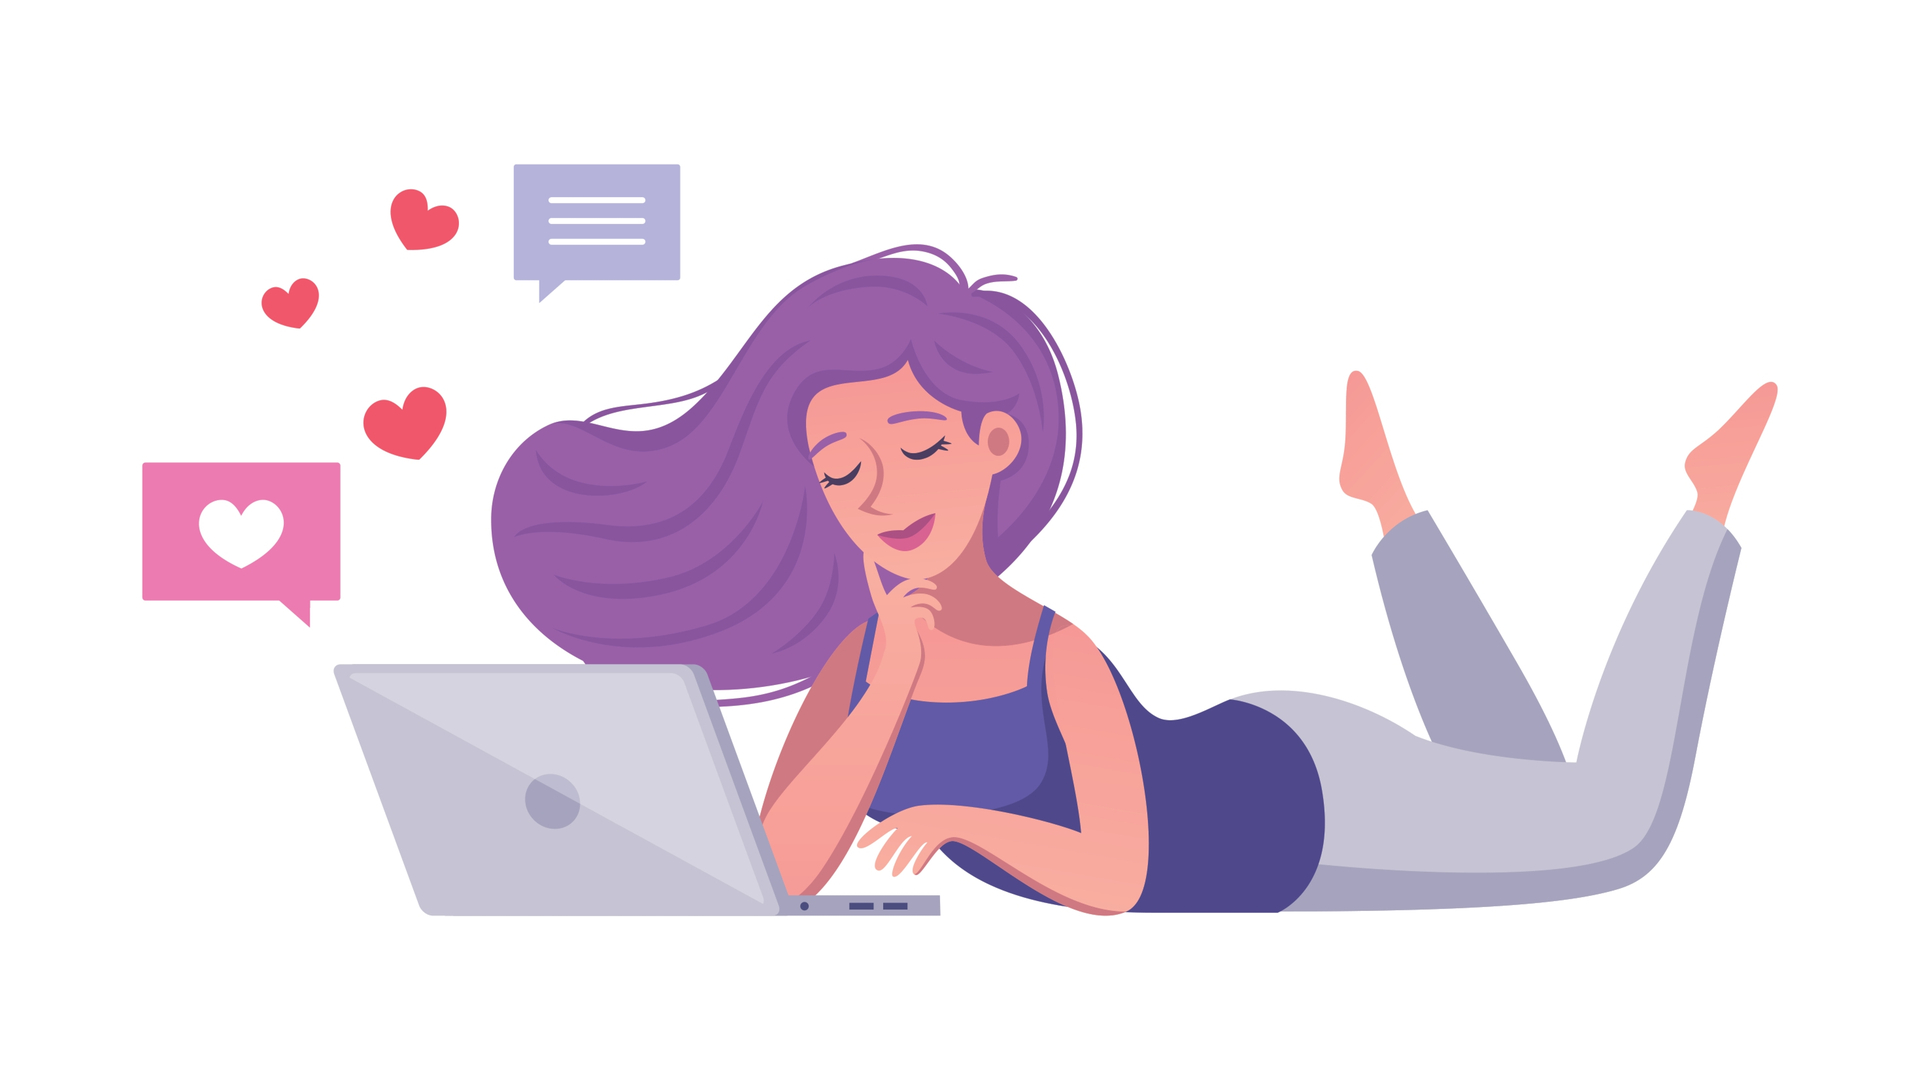 Illustration of a purple-haired woman lying on the ground with her laptop in front of her, with chat bubbles above it.